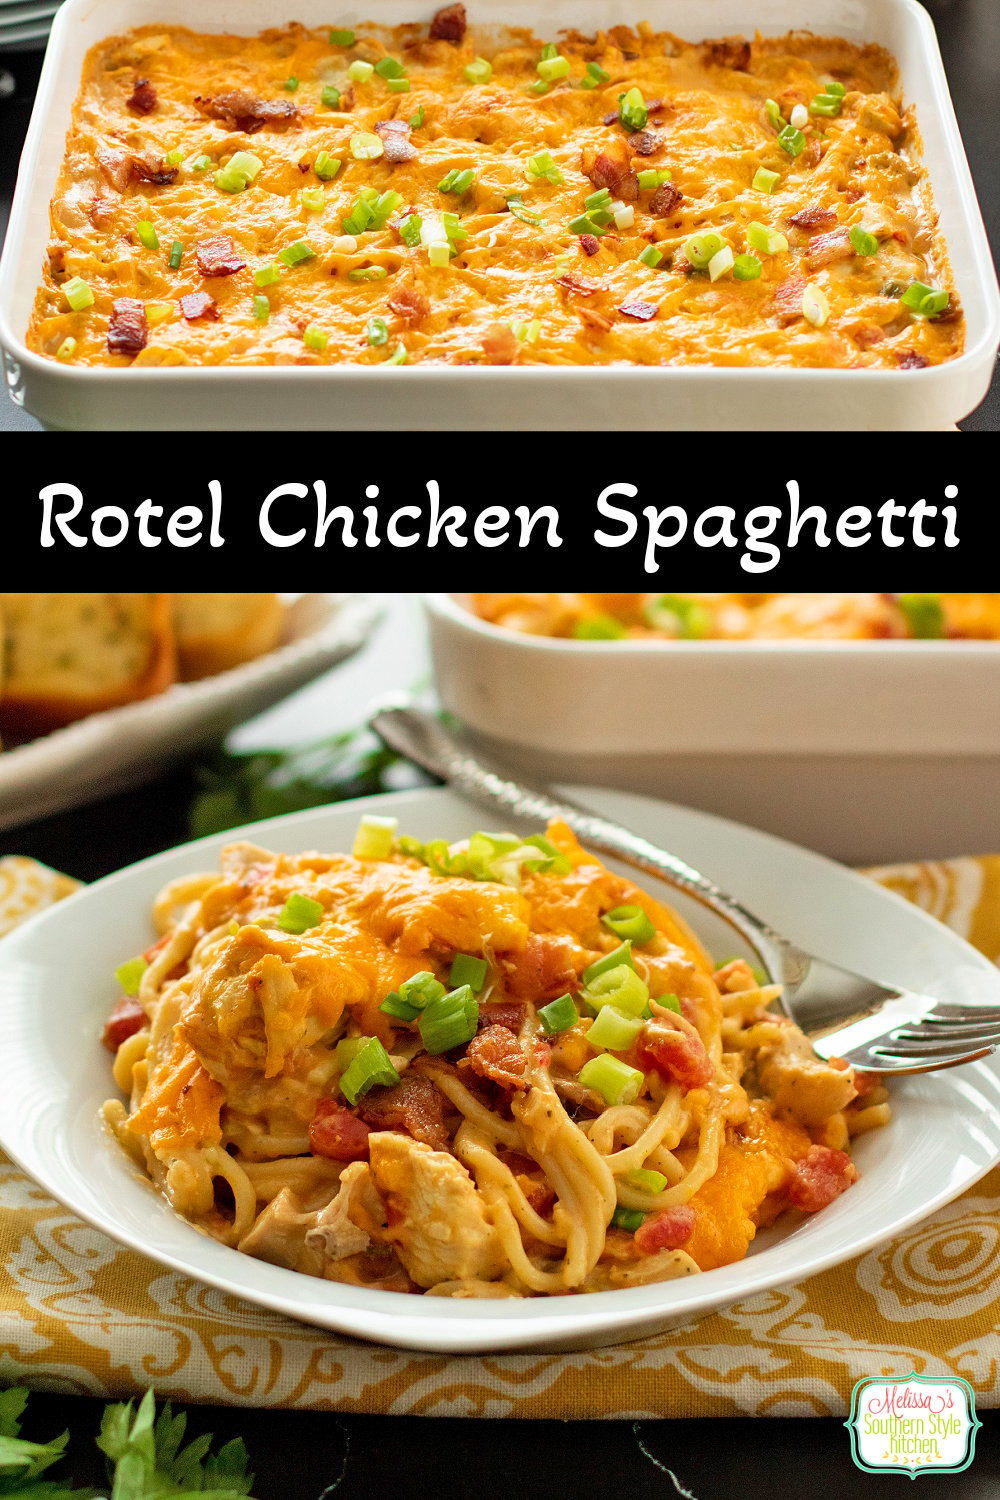 This delicious Rotel Chicken Spaghetti recipe features a homemade cheese sauce seasoned with Rotel tomatoes, rotisserie chicken and bacon. #chickenspaghetti #spaghetti #homemadespaghetti #easychickenrecipes #easypastarecipes #pasta #roteltomatoes #rotelrecipes #rotisseriechickenrecipes #bestchickenspaghetti